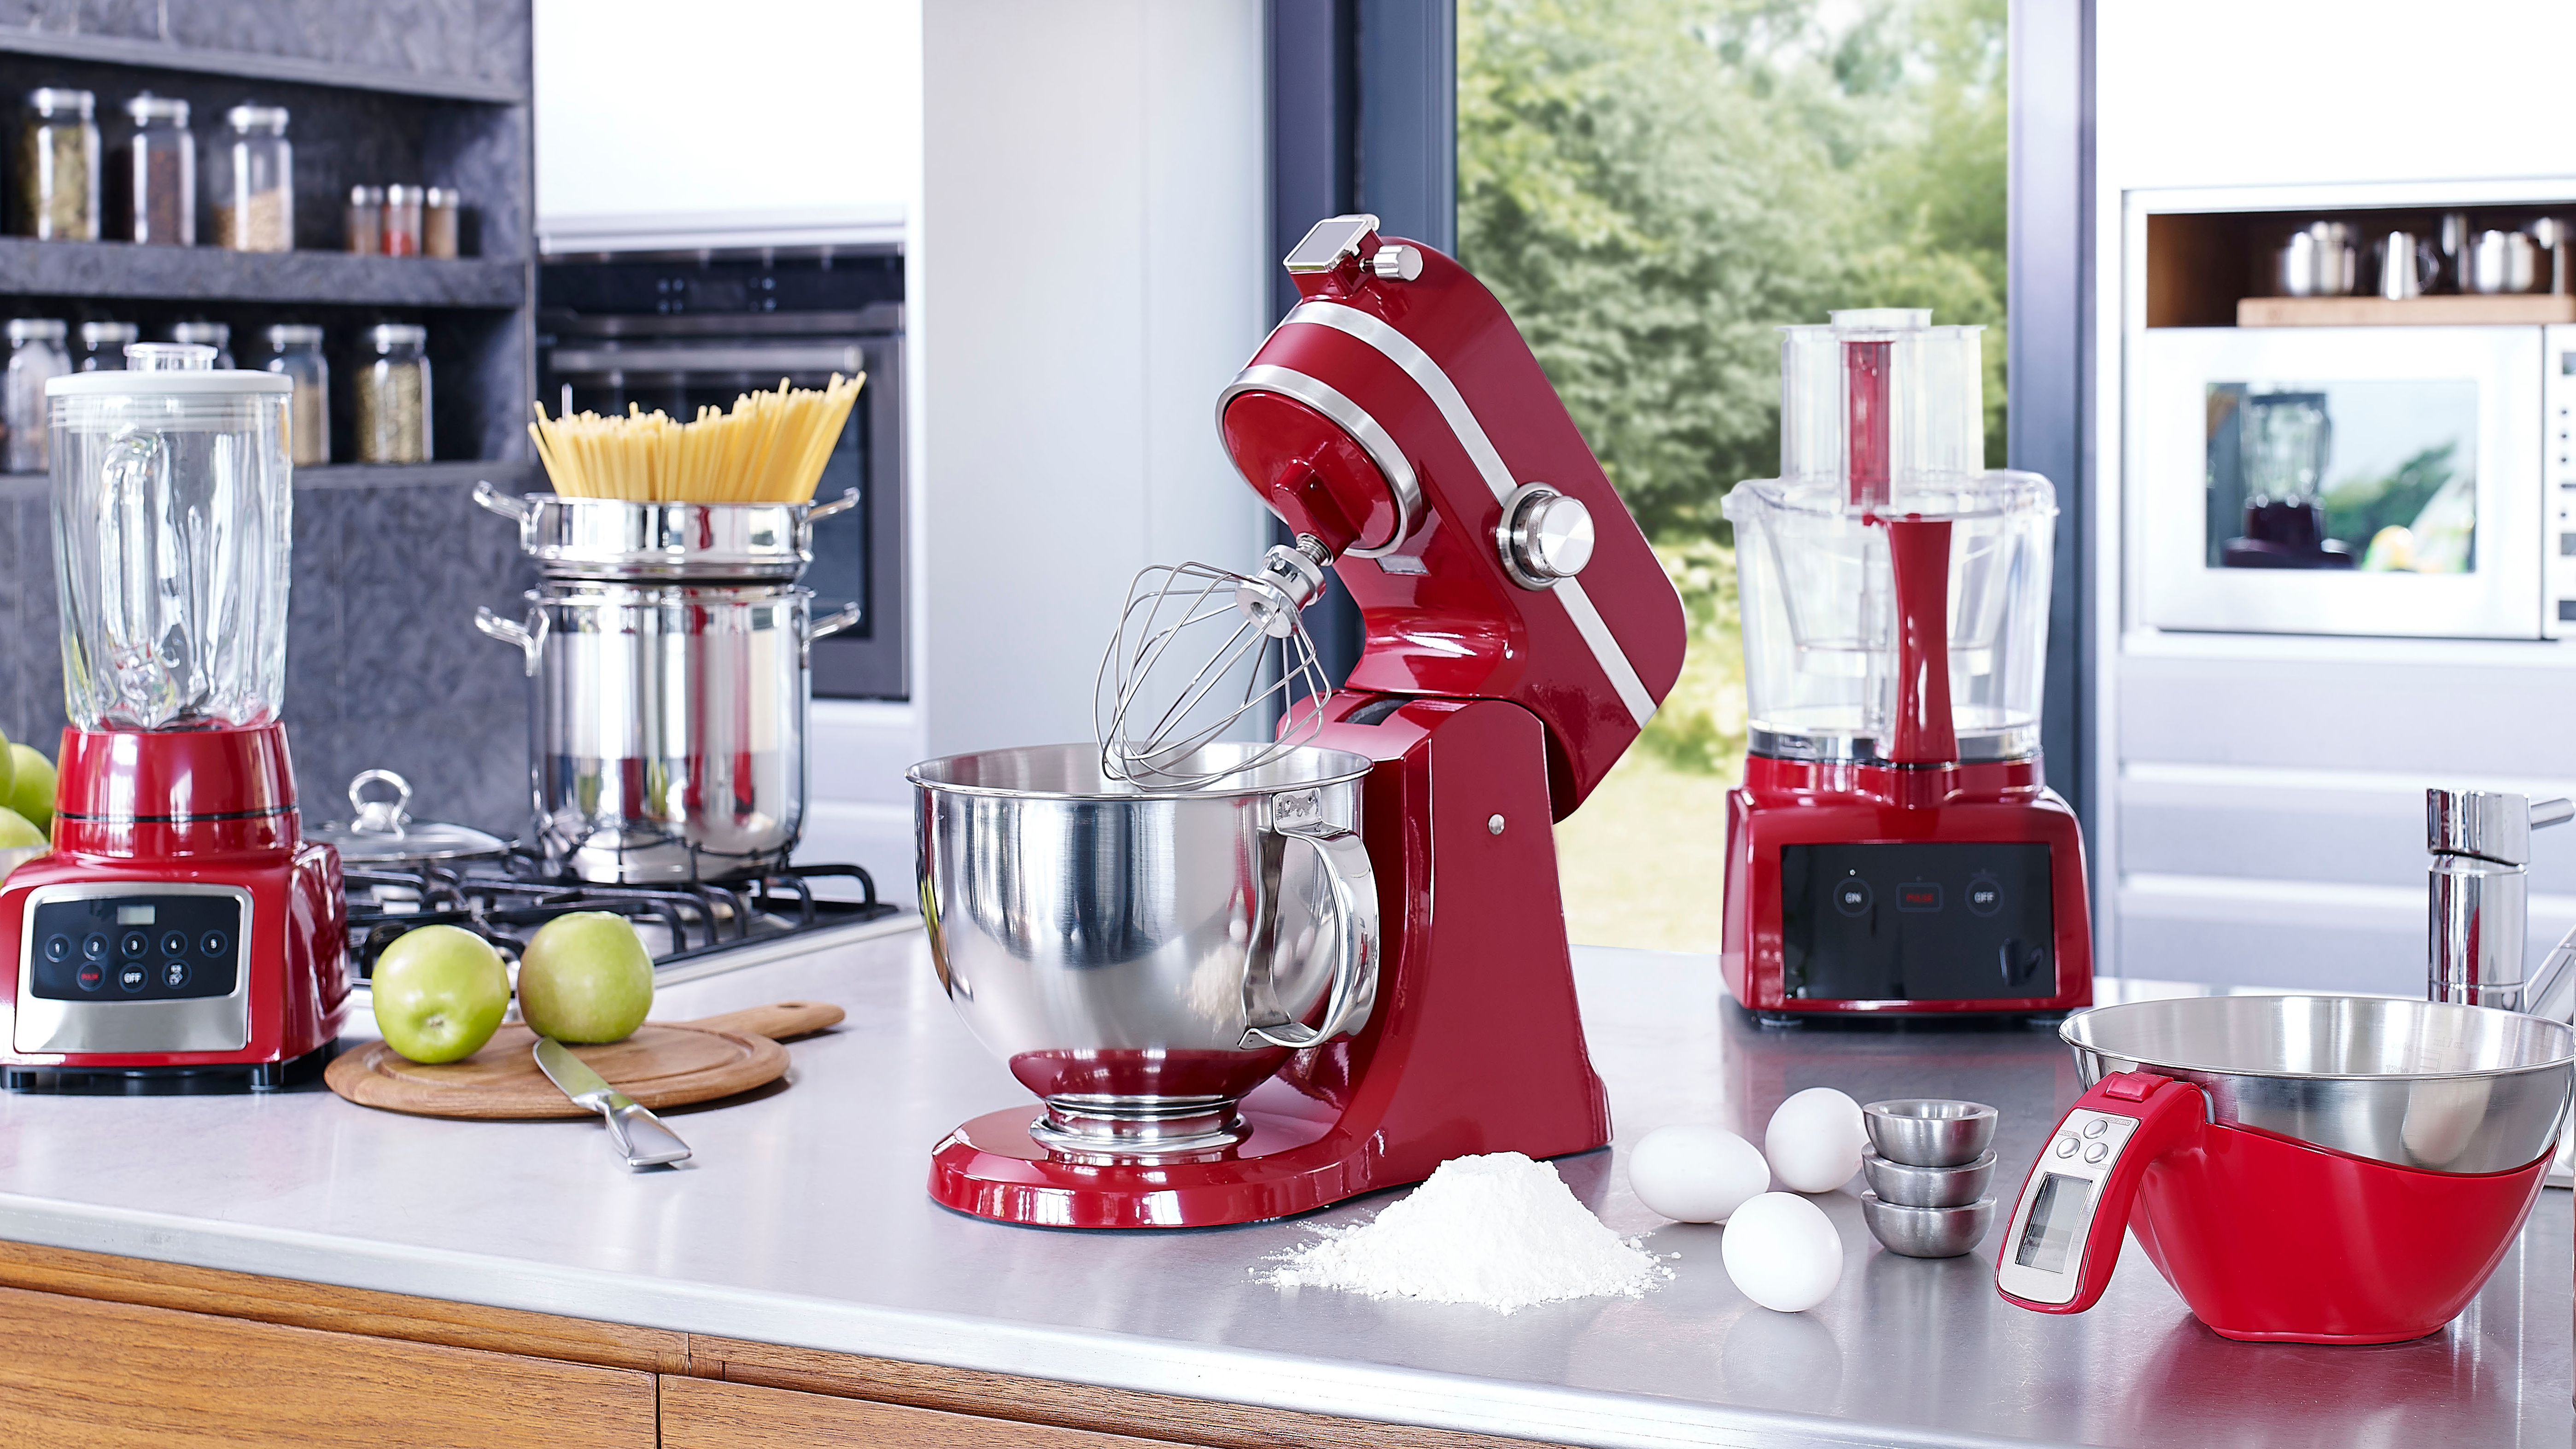 KitchenAid adds more color options for mixers, small appliances - CNET